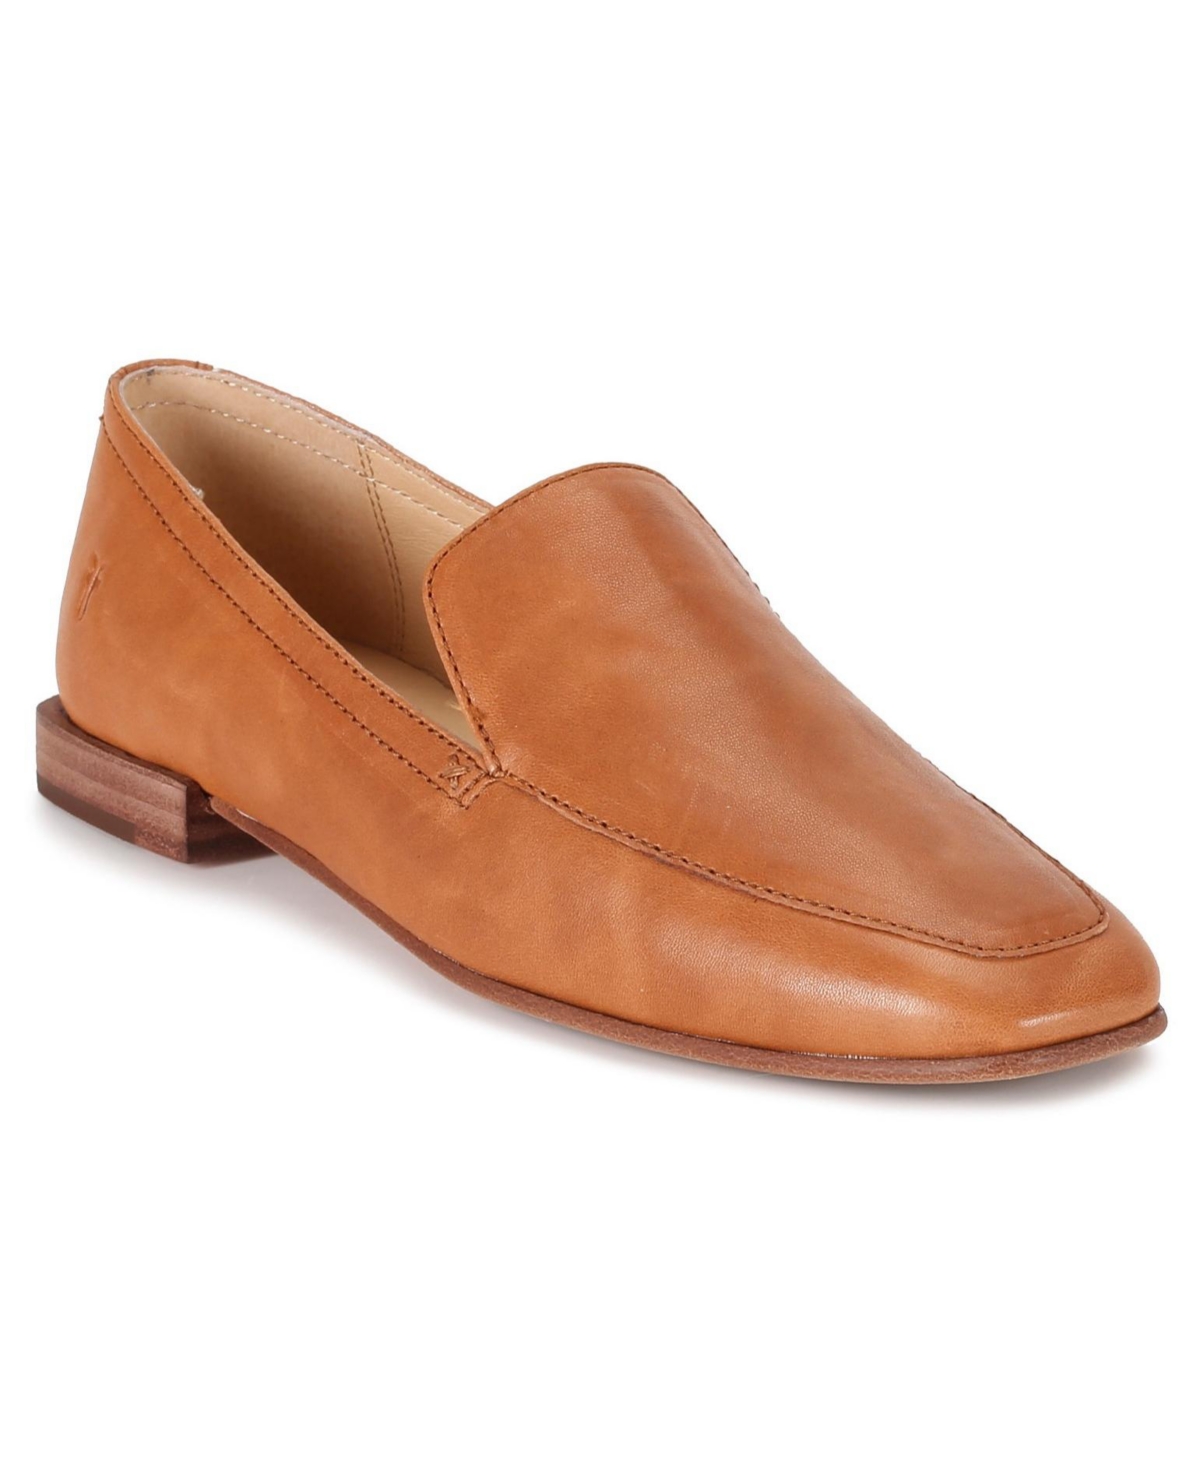 Women's Claire Venetian Slip On Leather Loafers - Tan